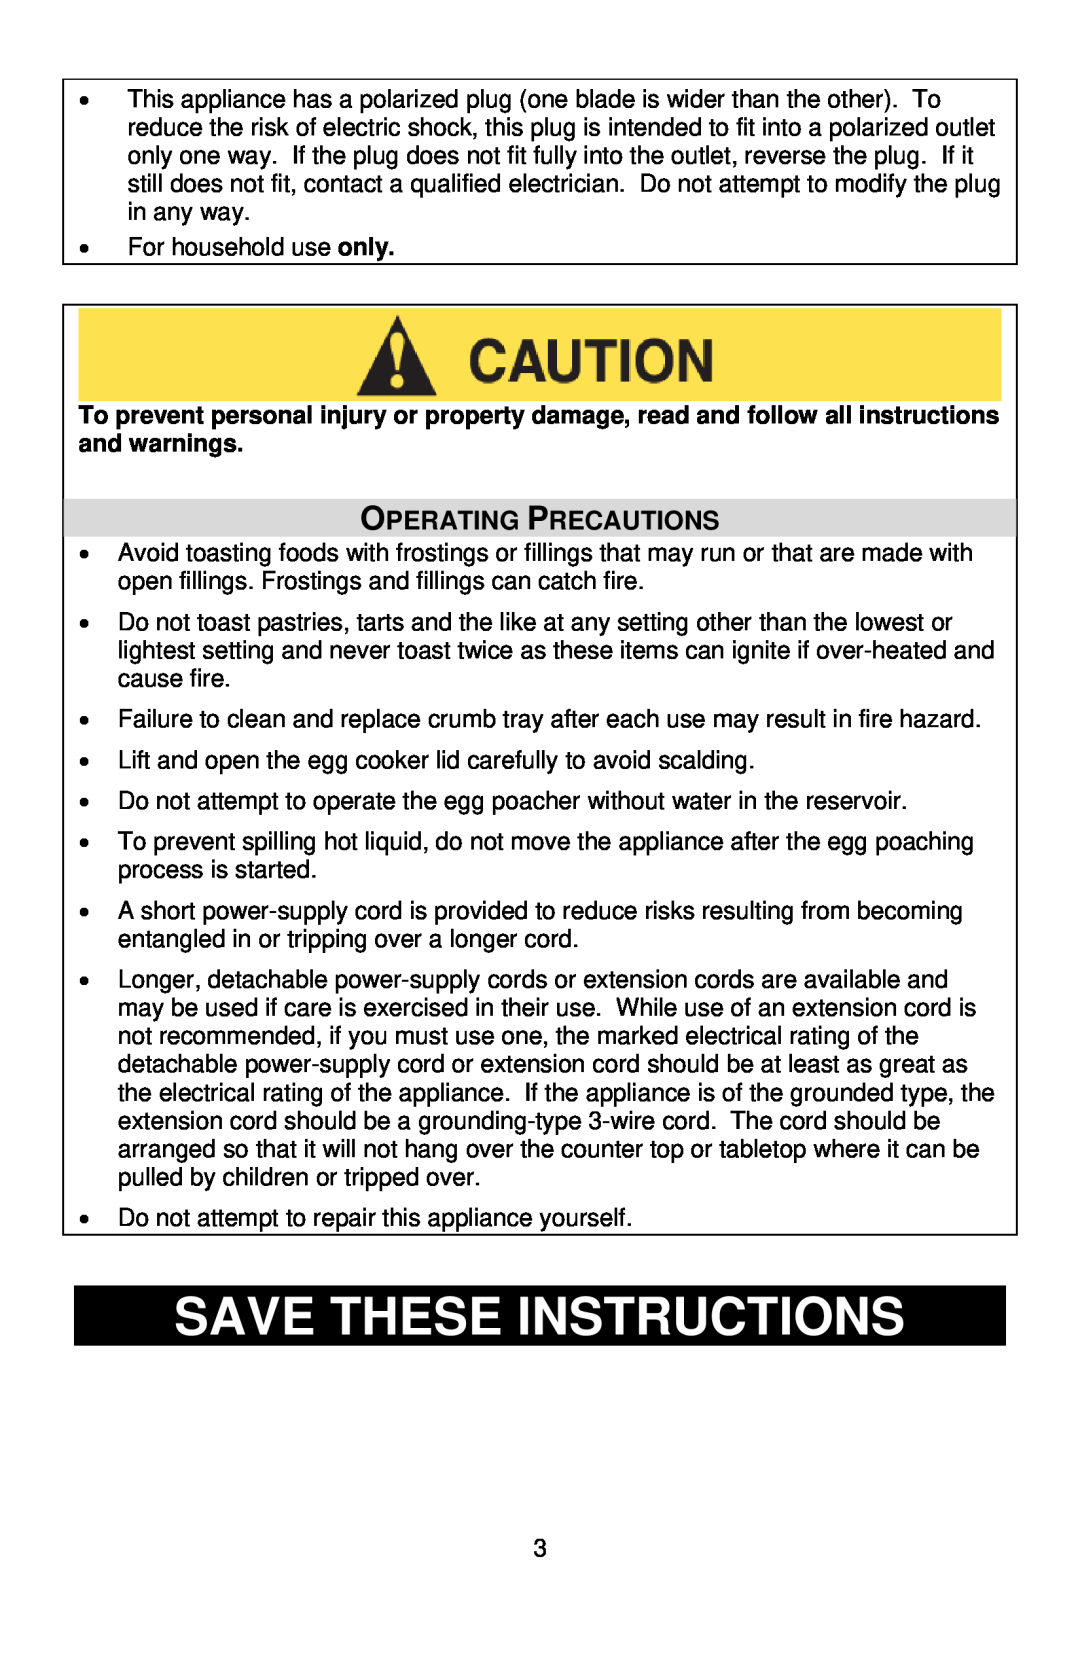 West Bend L5748, TEMPR instruction manual Save These Instructions, Operating Precautions 